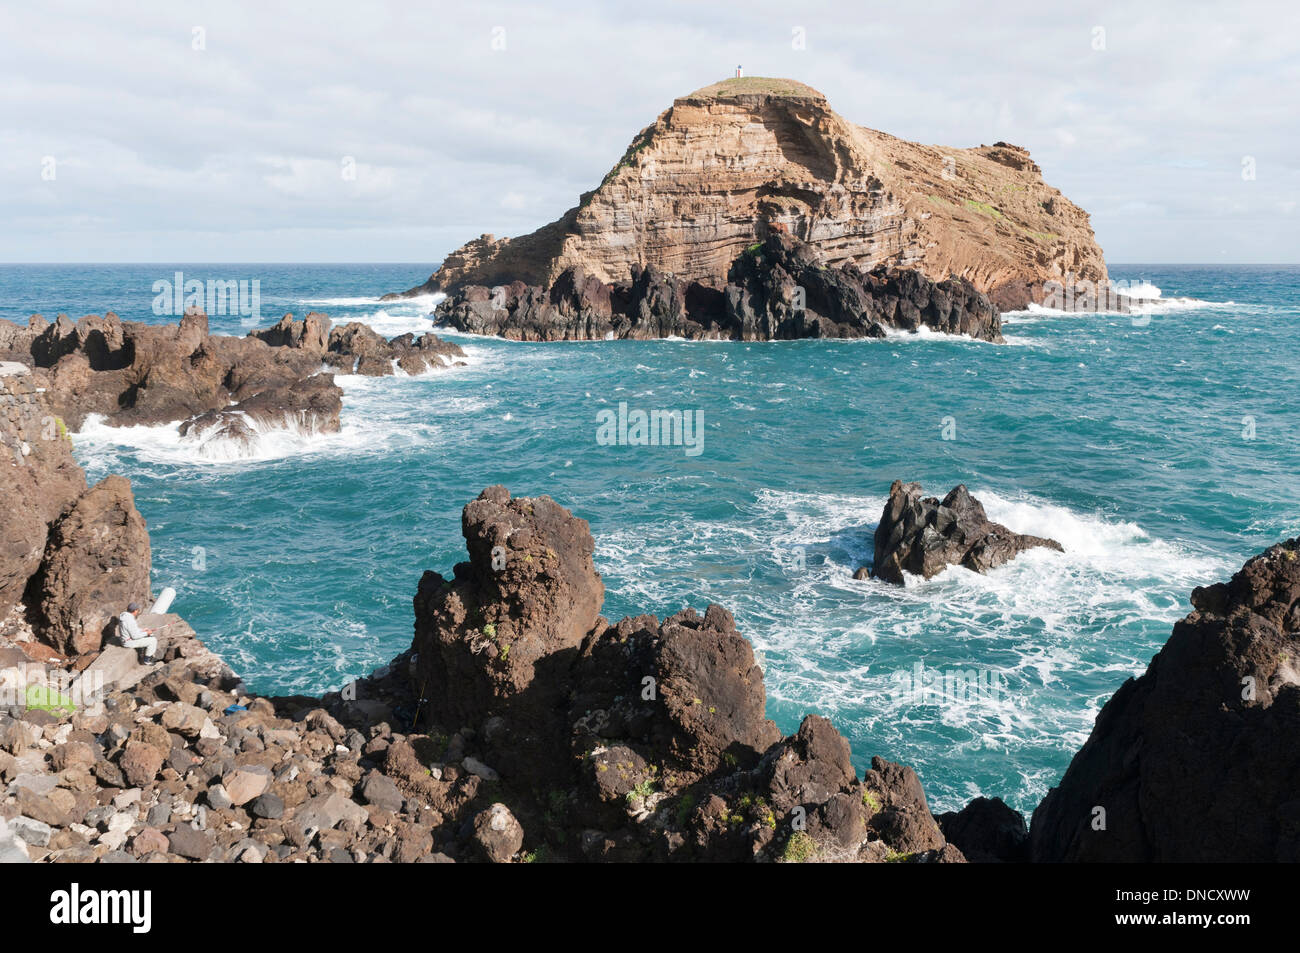 A man fishes on the headland at Porto Moniz, the most north-Westerley point of Madeira, Portugal Stock Photo